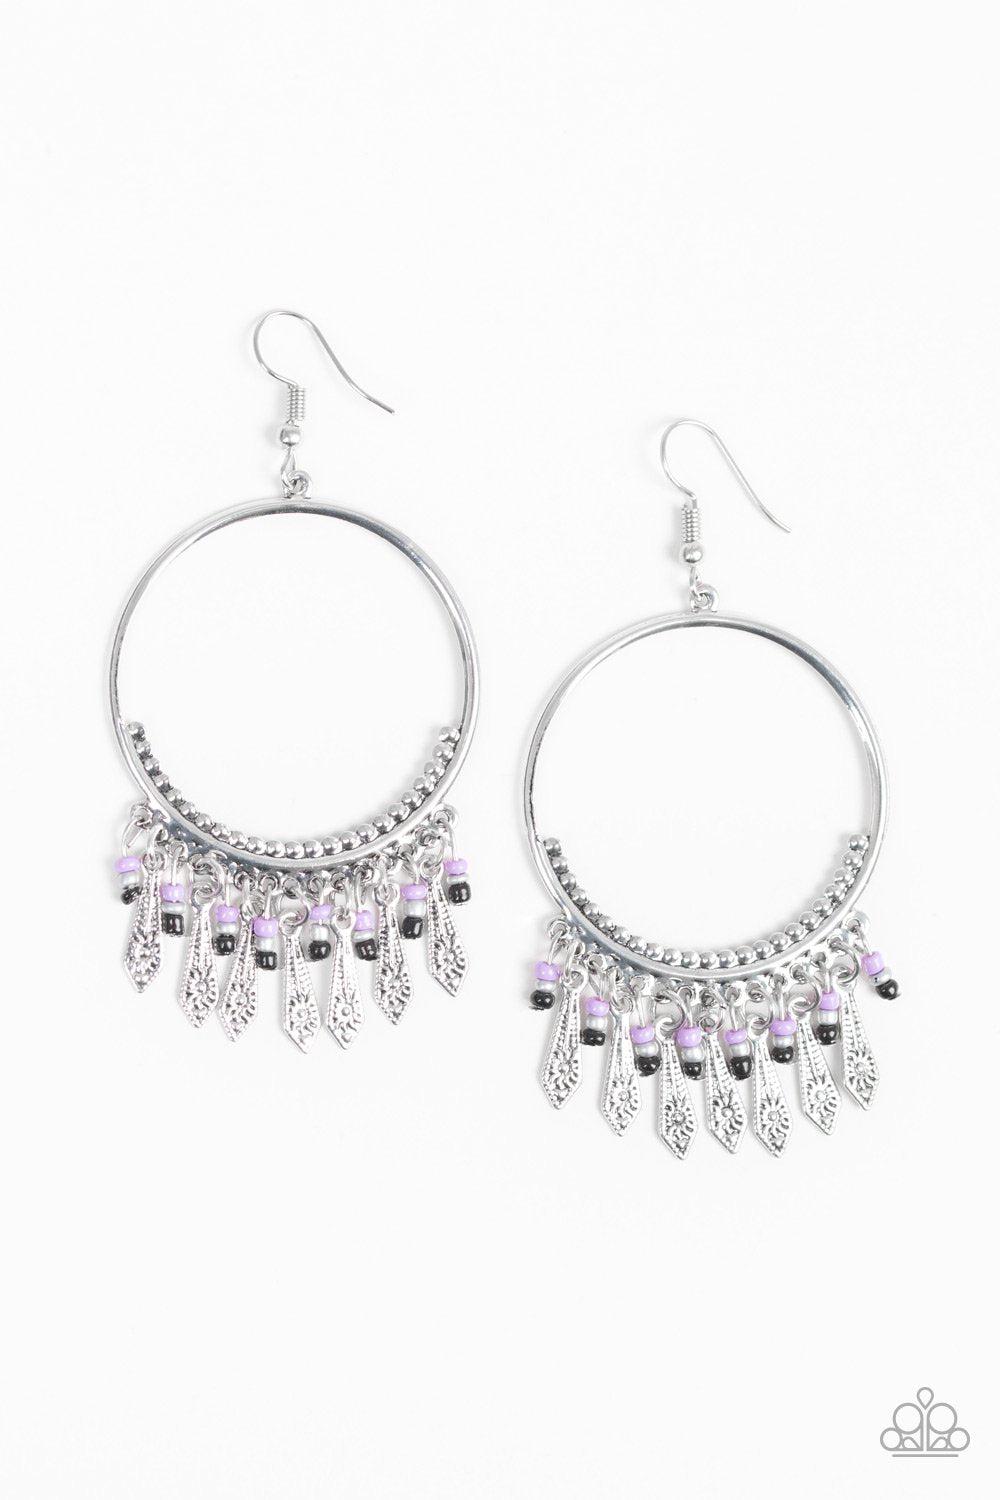 Floral Serenity Silver and Purple Earrings - Paparazzi Accessories-CarasShop.com - $5 Jewelry by Cara Jewels